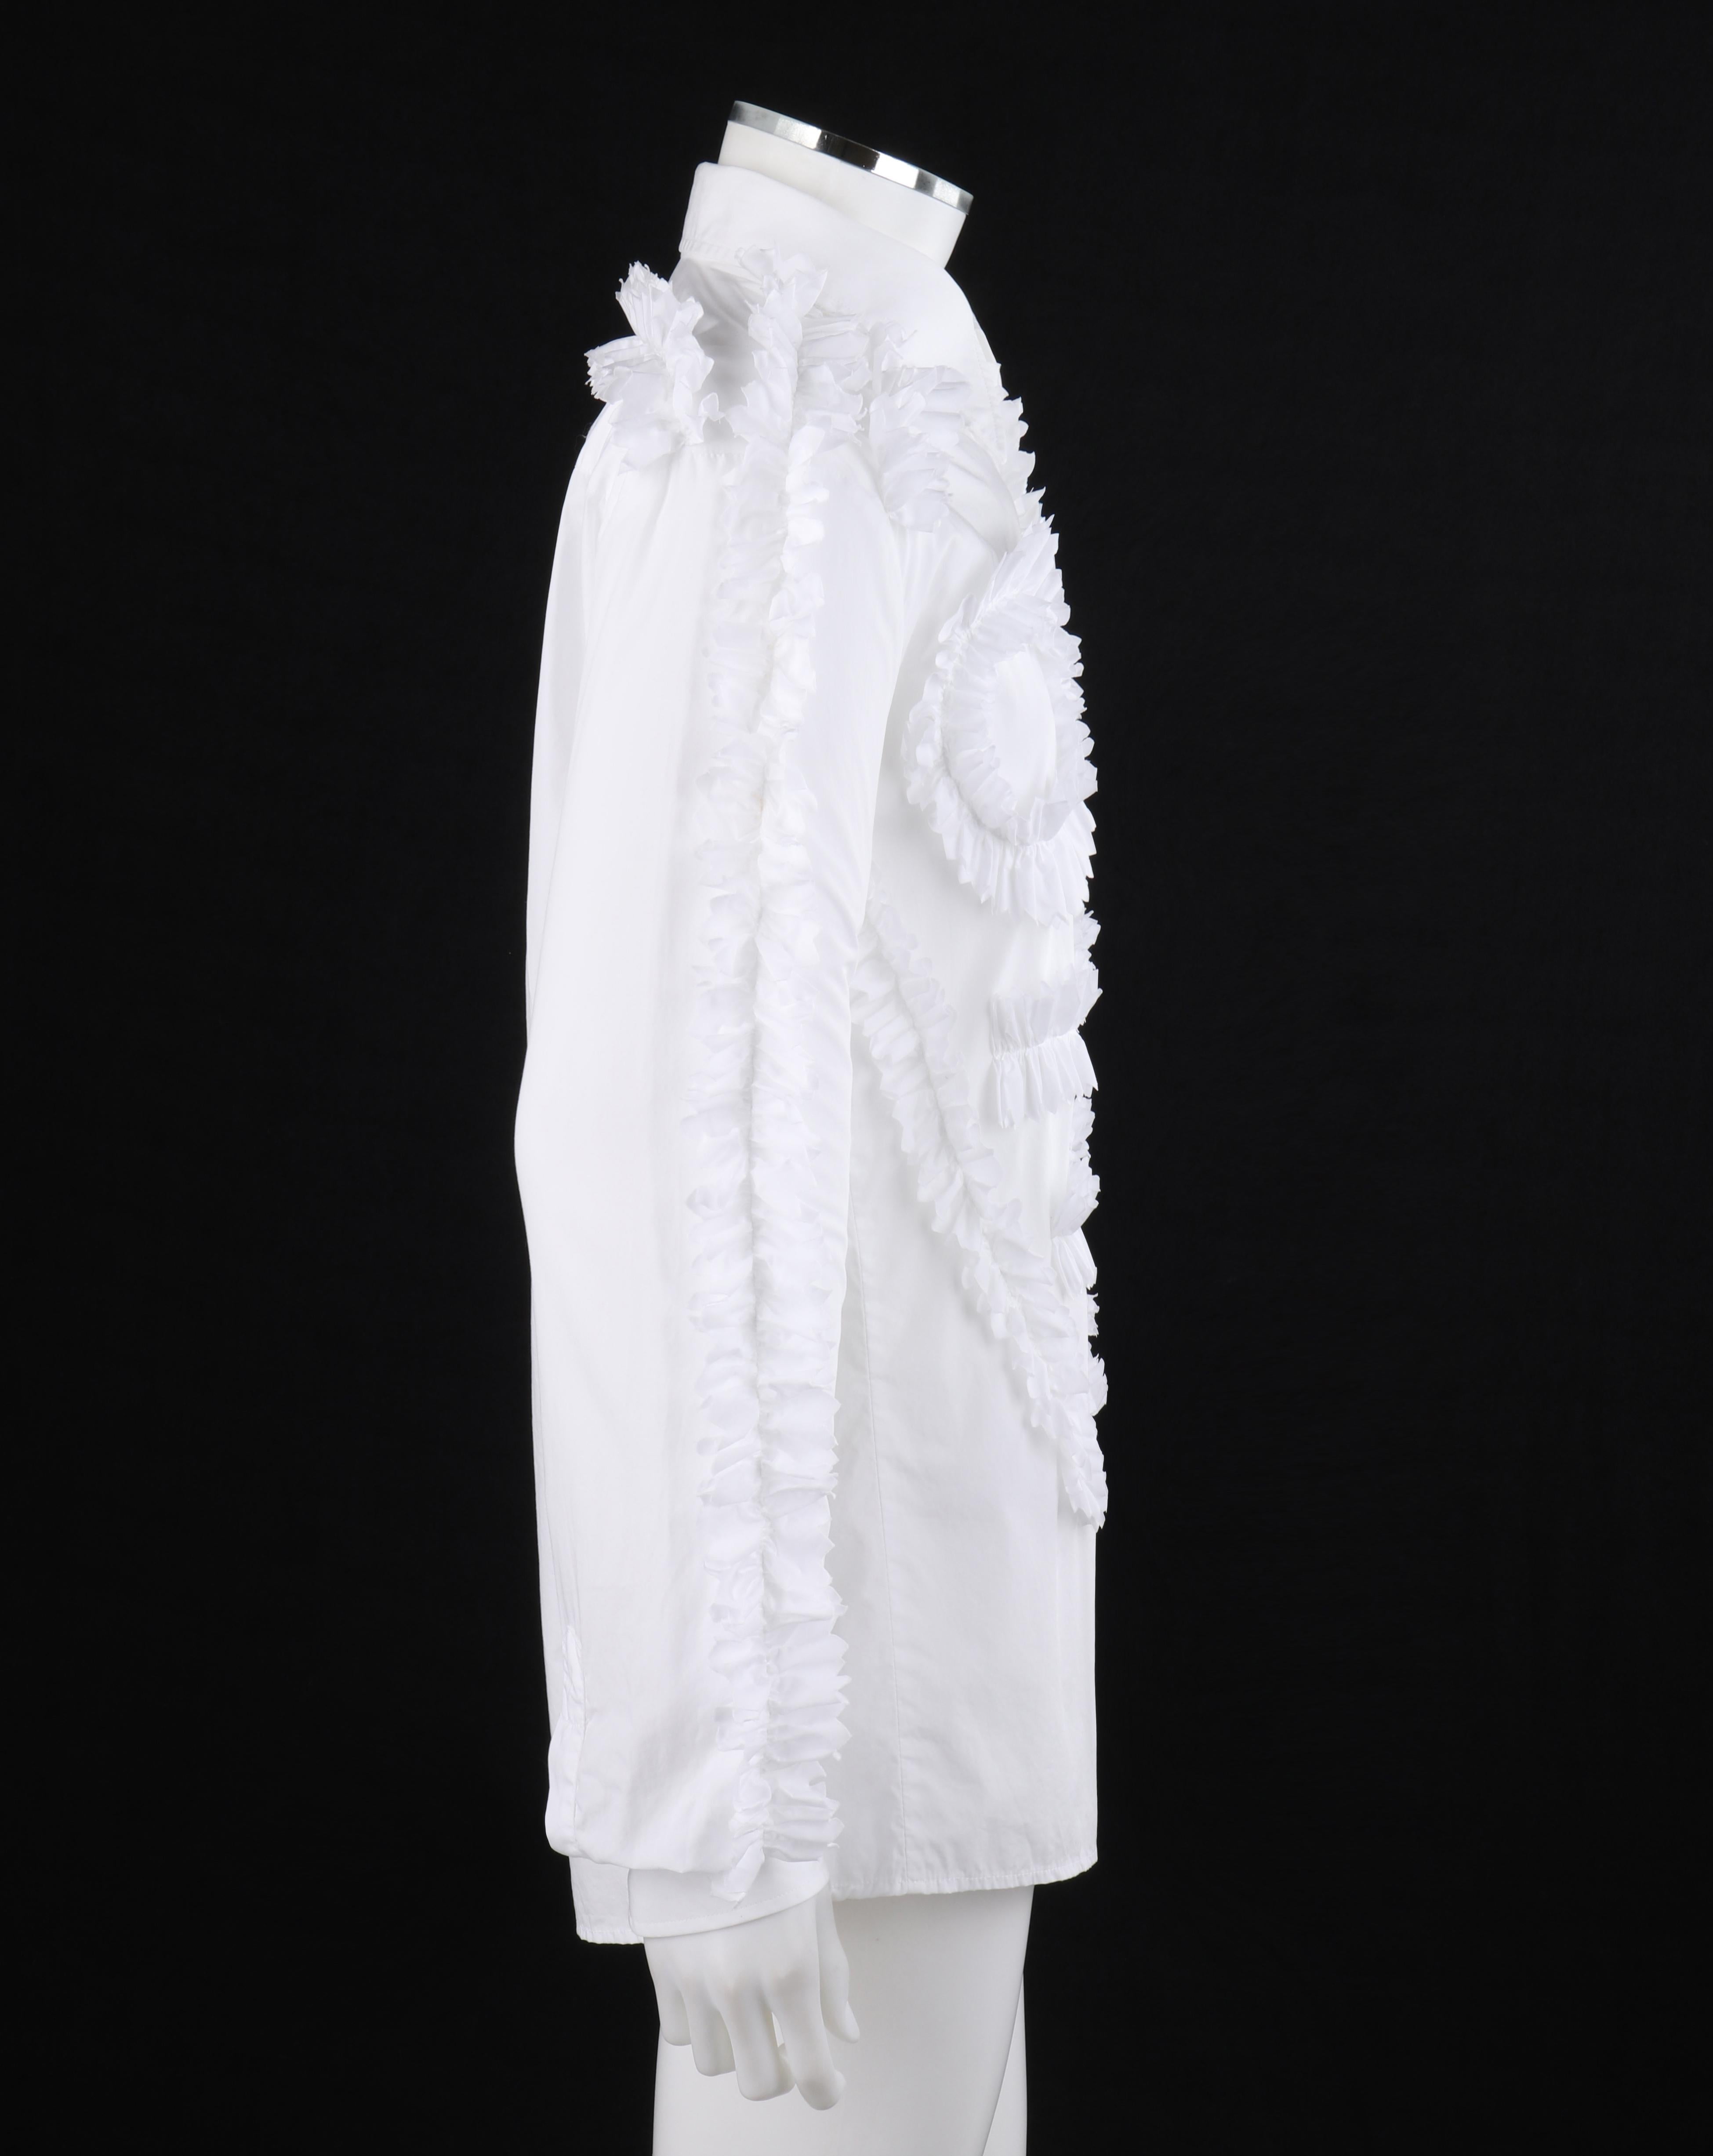 WALTER VAN BEIRENDONCK A/W 2014 Men's Symmetric White Ruffle Button Front Shirt  In Good Condition For Sale In Thiensville, WI